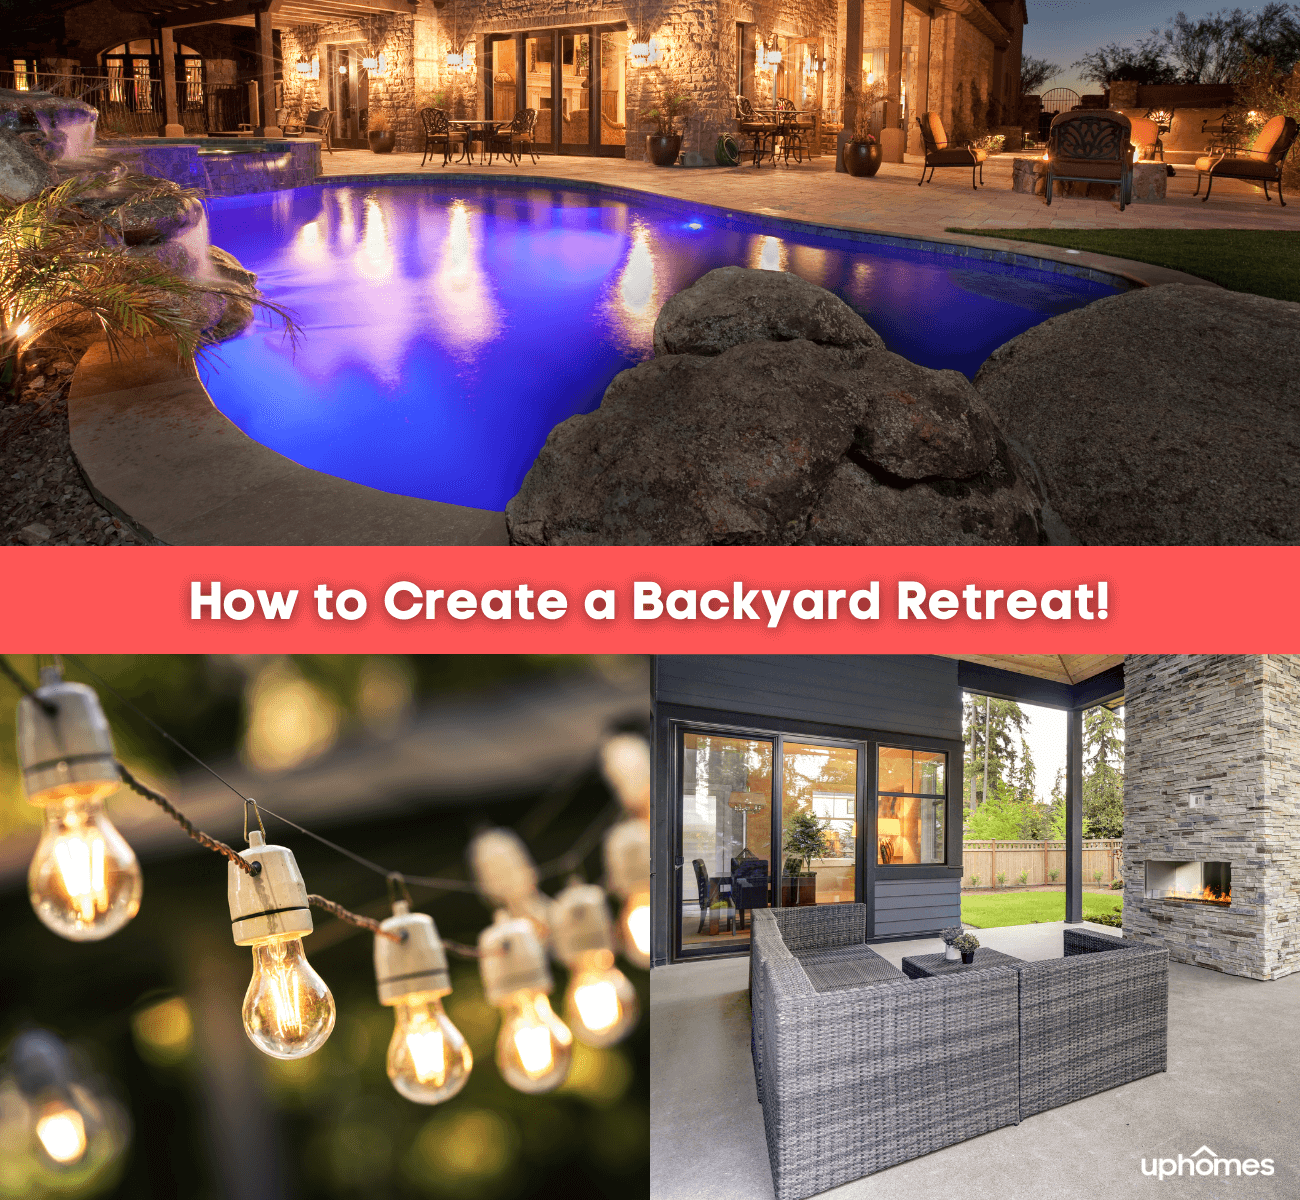 How to Create a Beautiful Backyard Retreat with examples of pool, string lights, and patio set up with fireplace